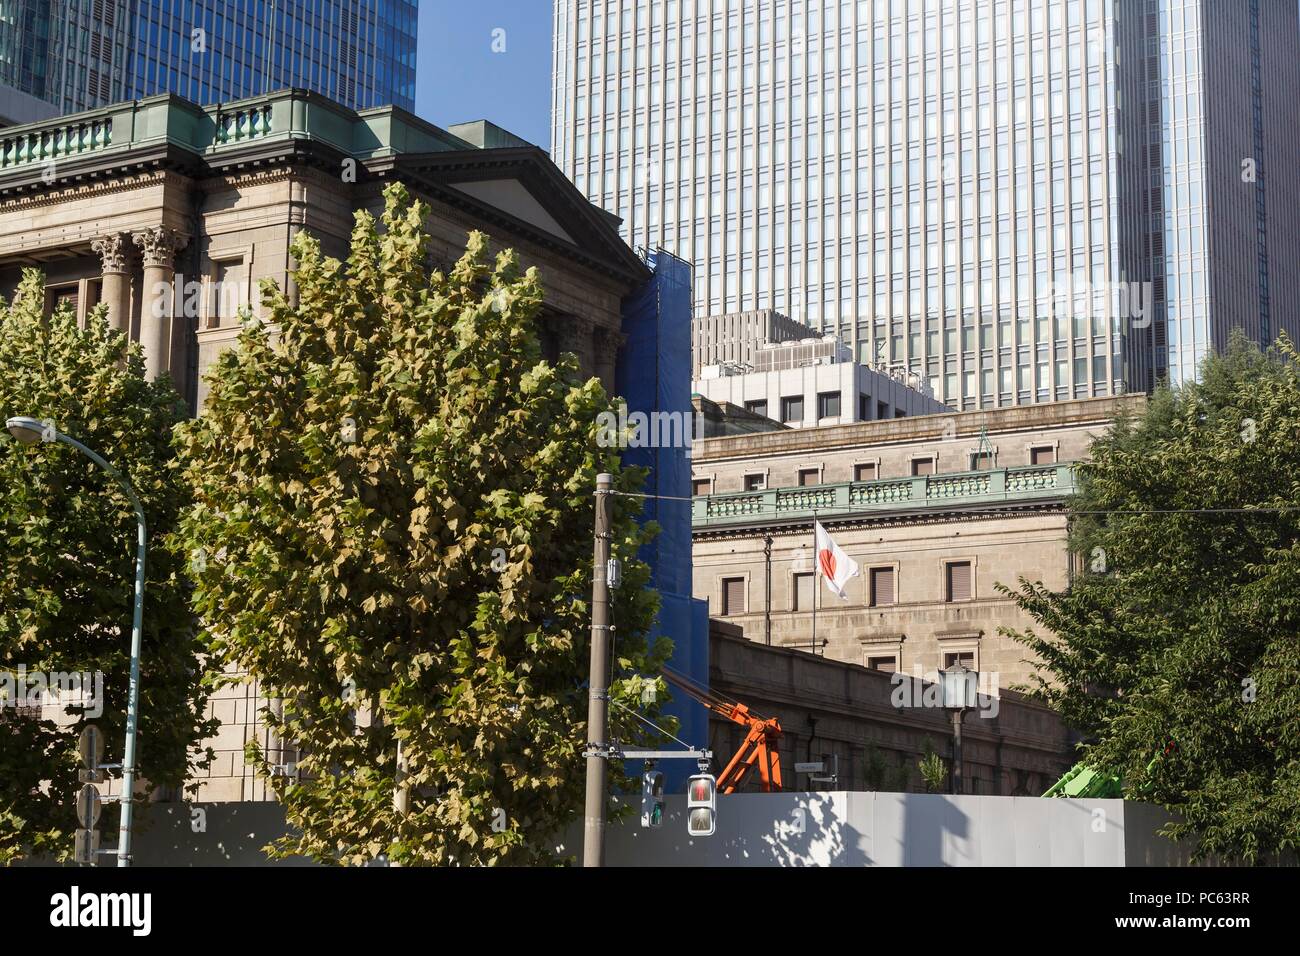 A view of the Bank of Japan under construction on July 31, 2018, Tokyo, Japan. The Nikkei Stock Average finished up 0.04% at 22,553.72, while the broader Topix index fell 0.84% to 1,753.29 after the Bank of Japan (BOJ) announced it would maintain ''very low'' interest rates. Credit: Rodrigo Reyes Marin/AFLO/Alamy Live News Stock Photo